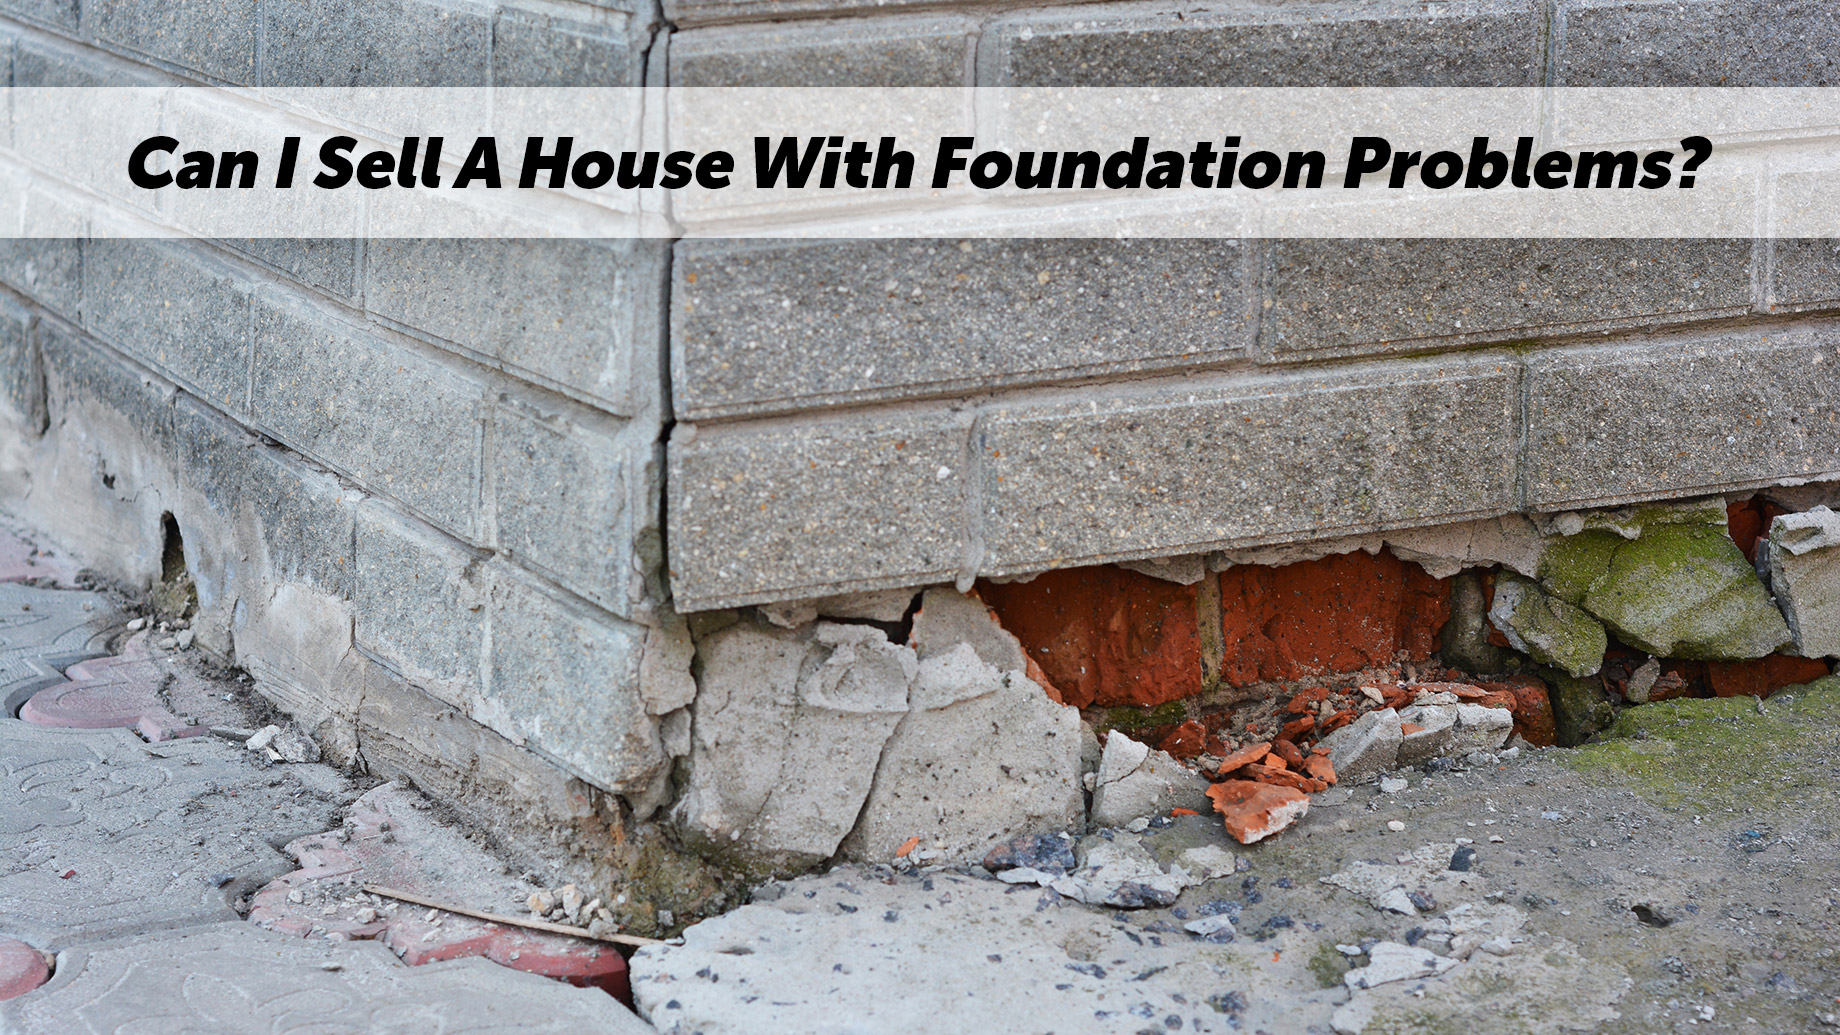 Can I Sell A House With Foundation Problems?